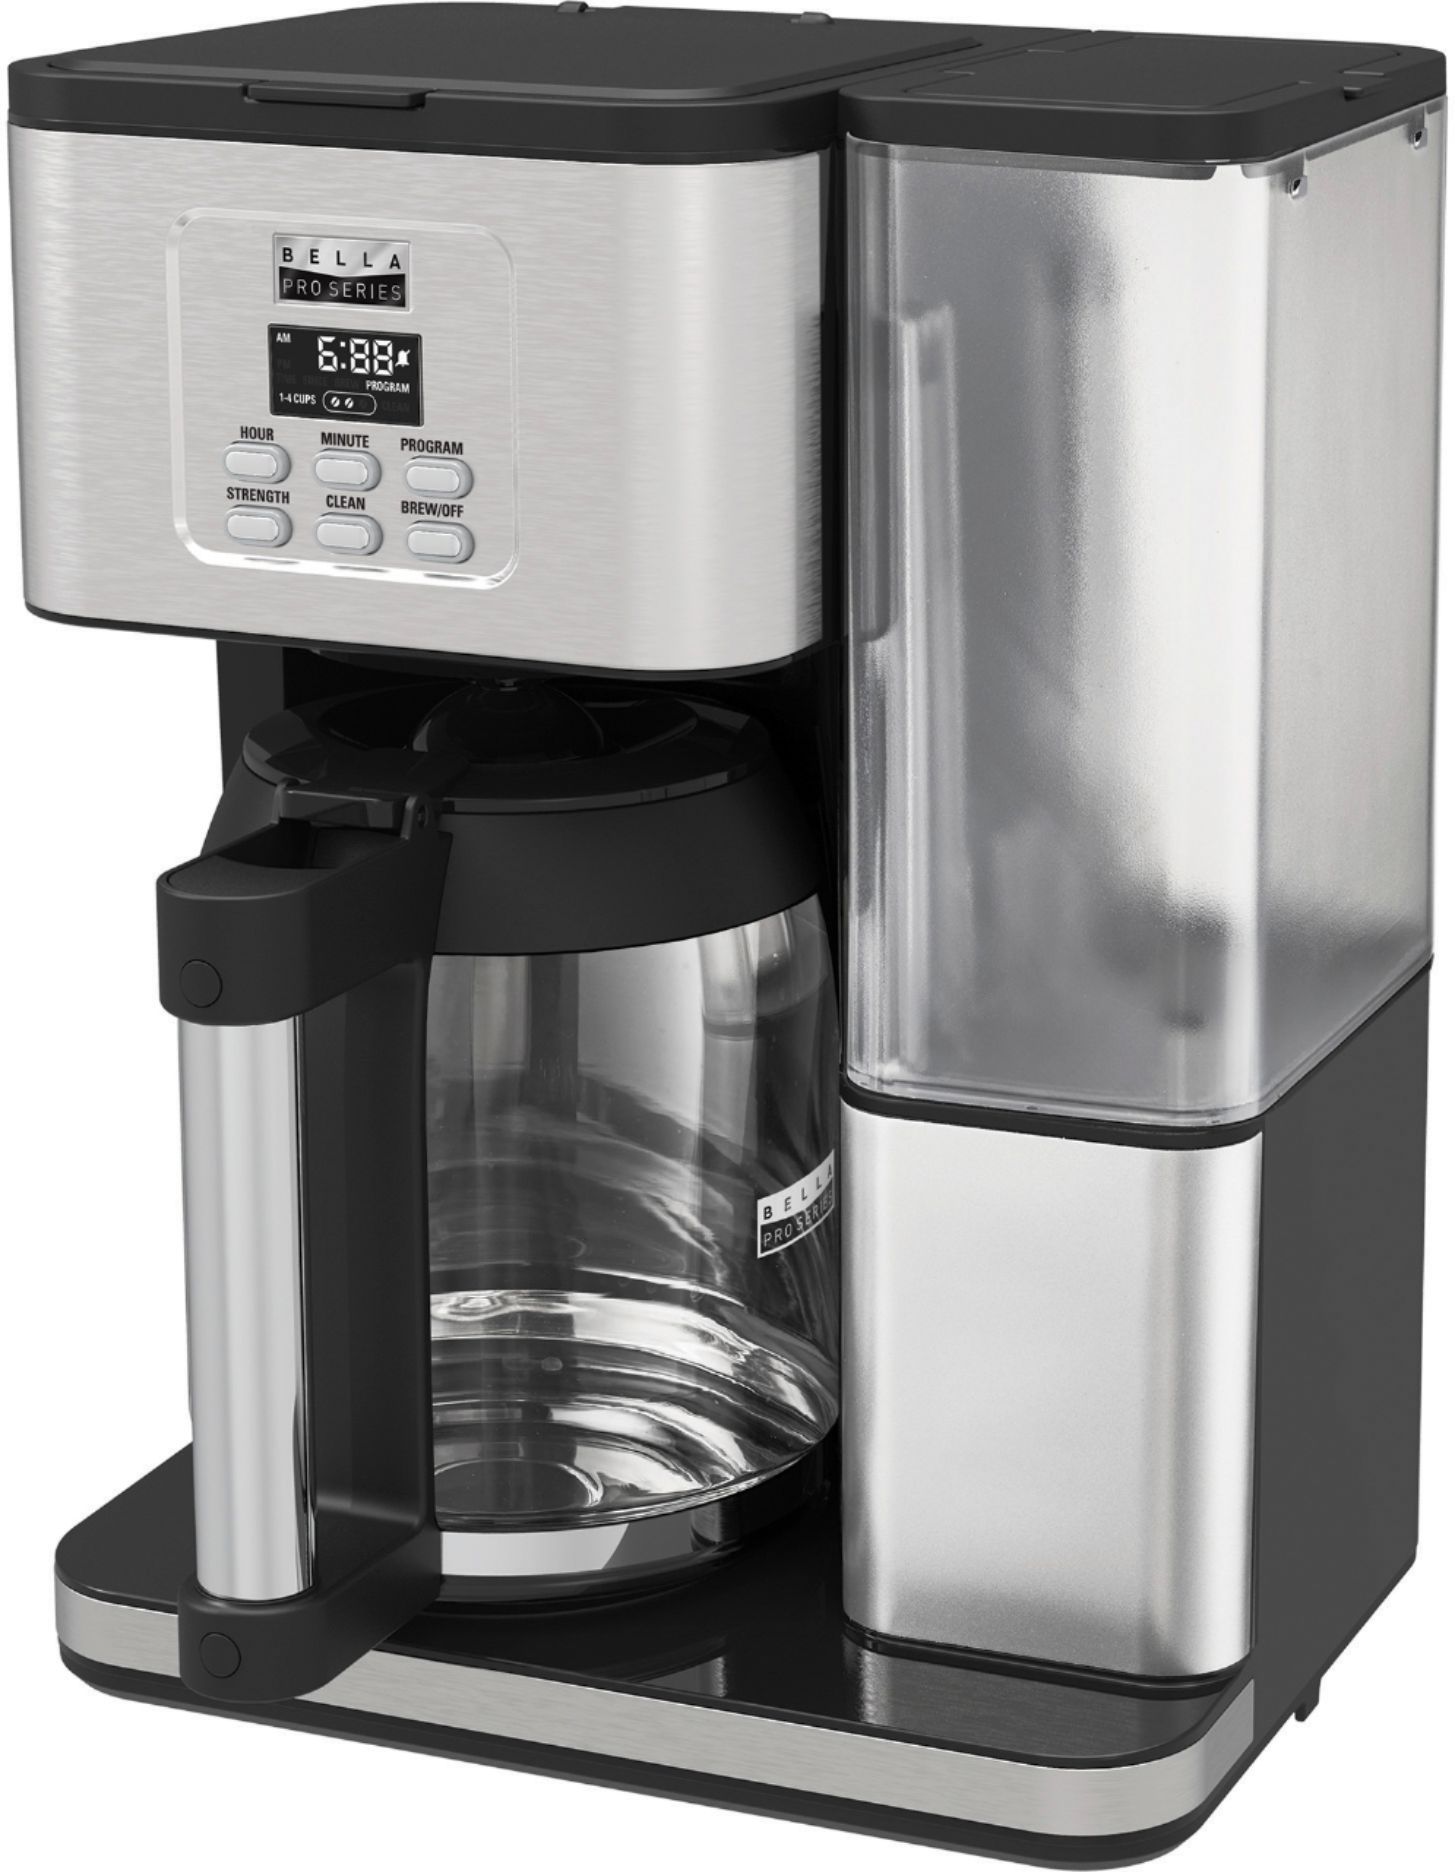 Bella Pro Series 18-Cup Programmable Coffee Maker Stainless Steel or Black  $34.99 (Reg. $100) Shipped - Couponing with Rachel